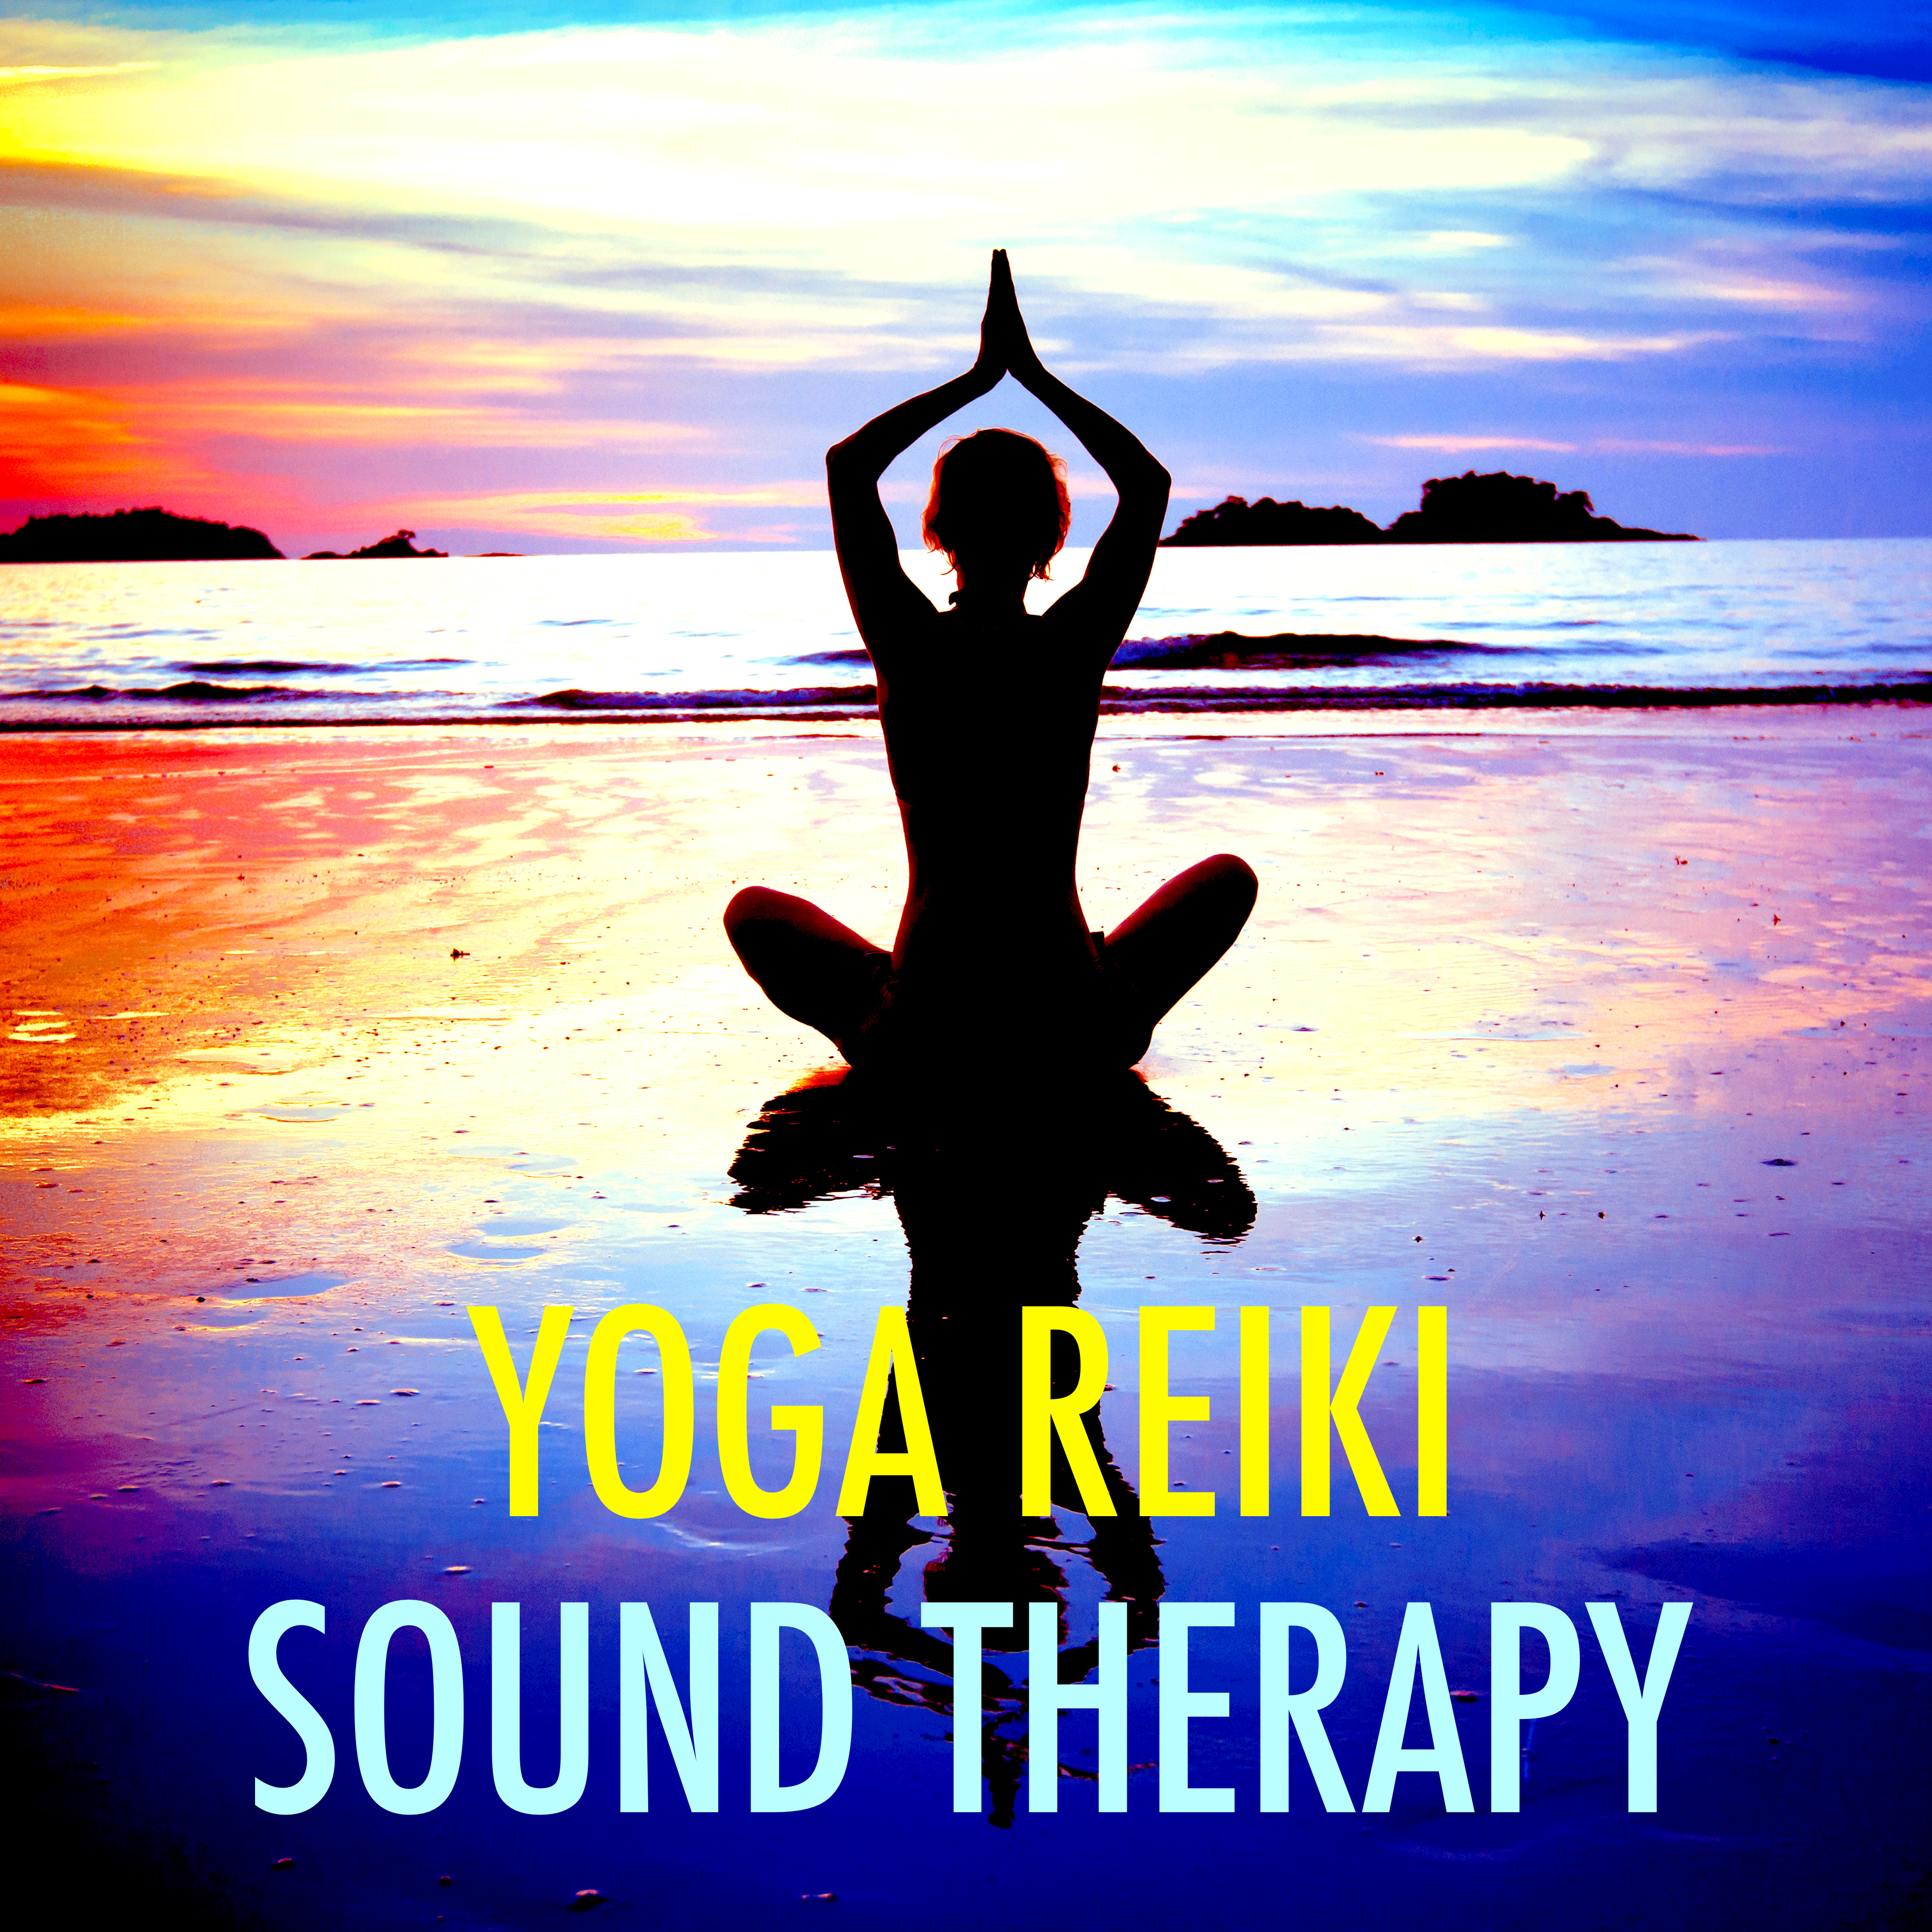 Yoga Reiki Sound Therapy: Songs for Relaxation, Meditation & Hatha Yoga, New Age Playlist for Yoga Class